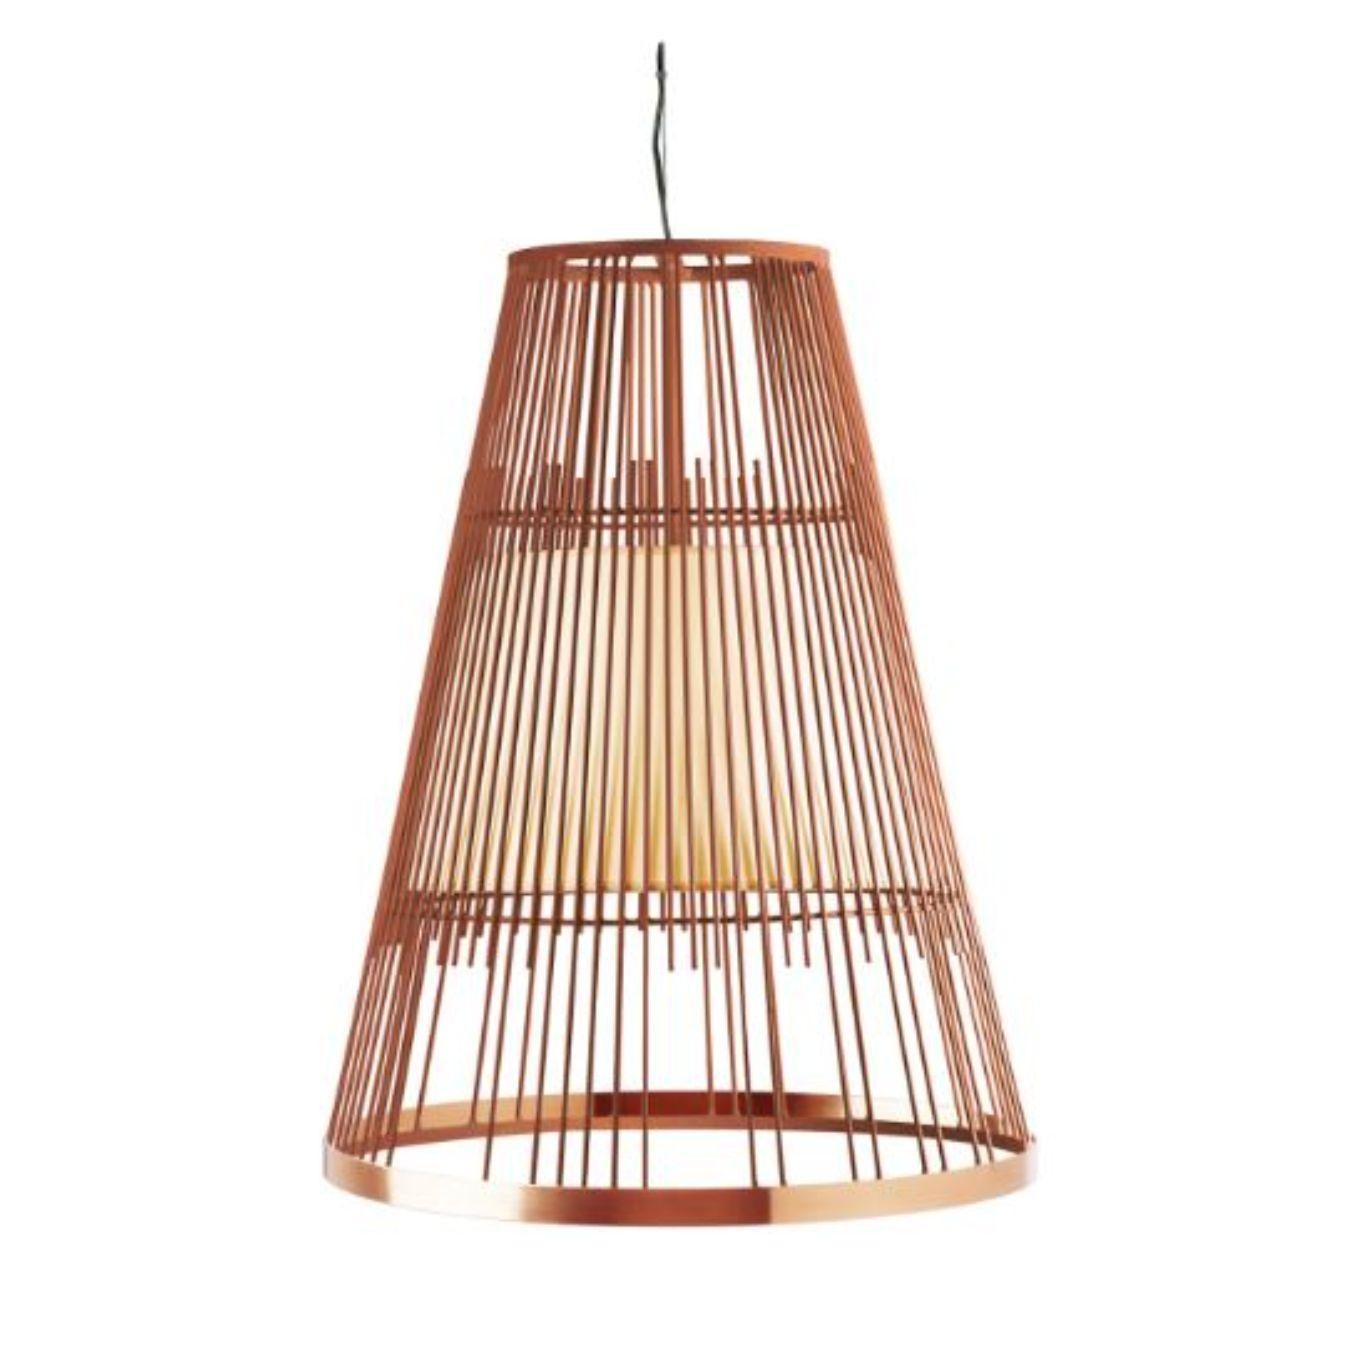 Salmon up suspension lamp with copper ring by Dooq.
Dimensions: W 55 x D 55 x H 72 cm.
Materials: lacquered metal, polished or brushed metal, copper.
abat-jour: cotton
Also available in different colors and